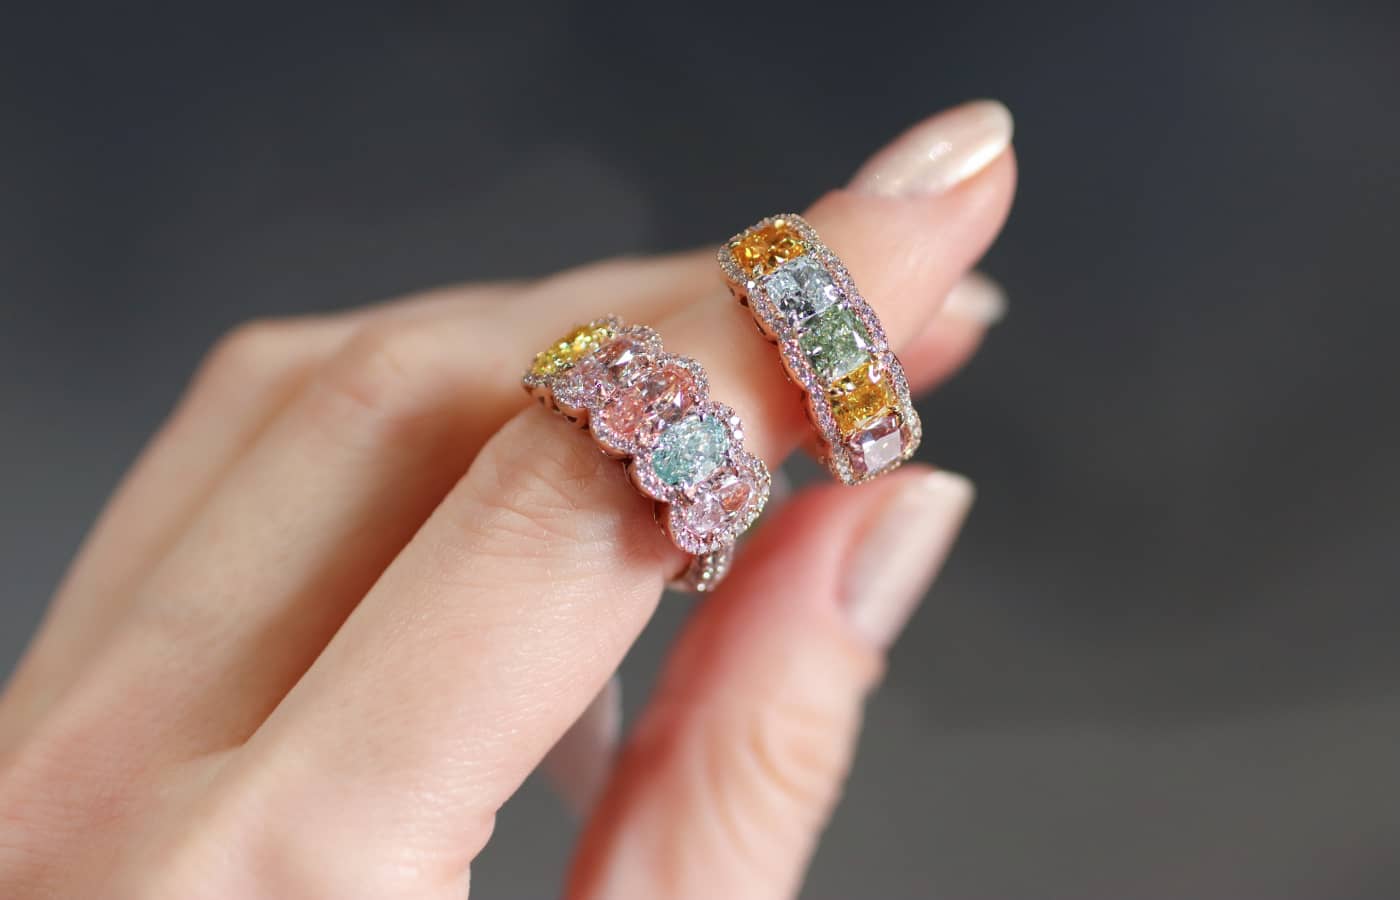 Anan Jewels rings featuring multi-coloured diamonds